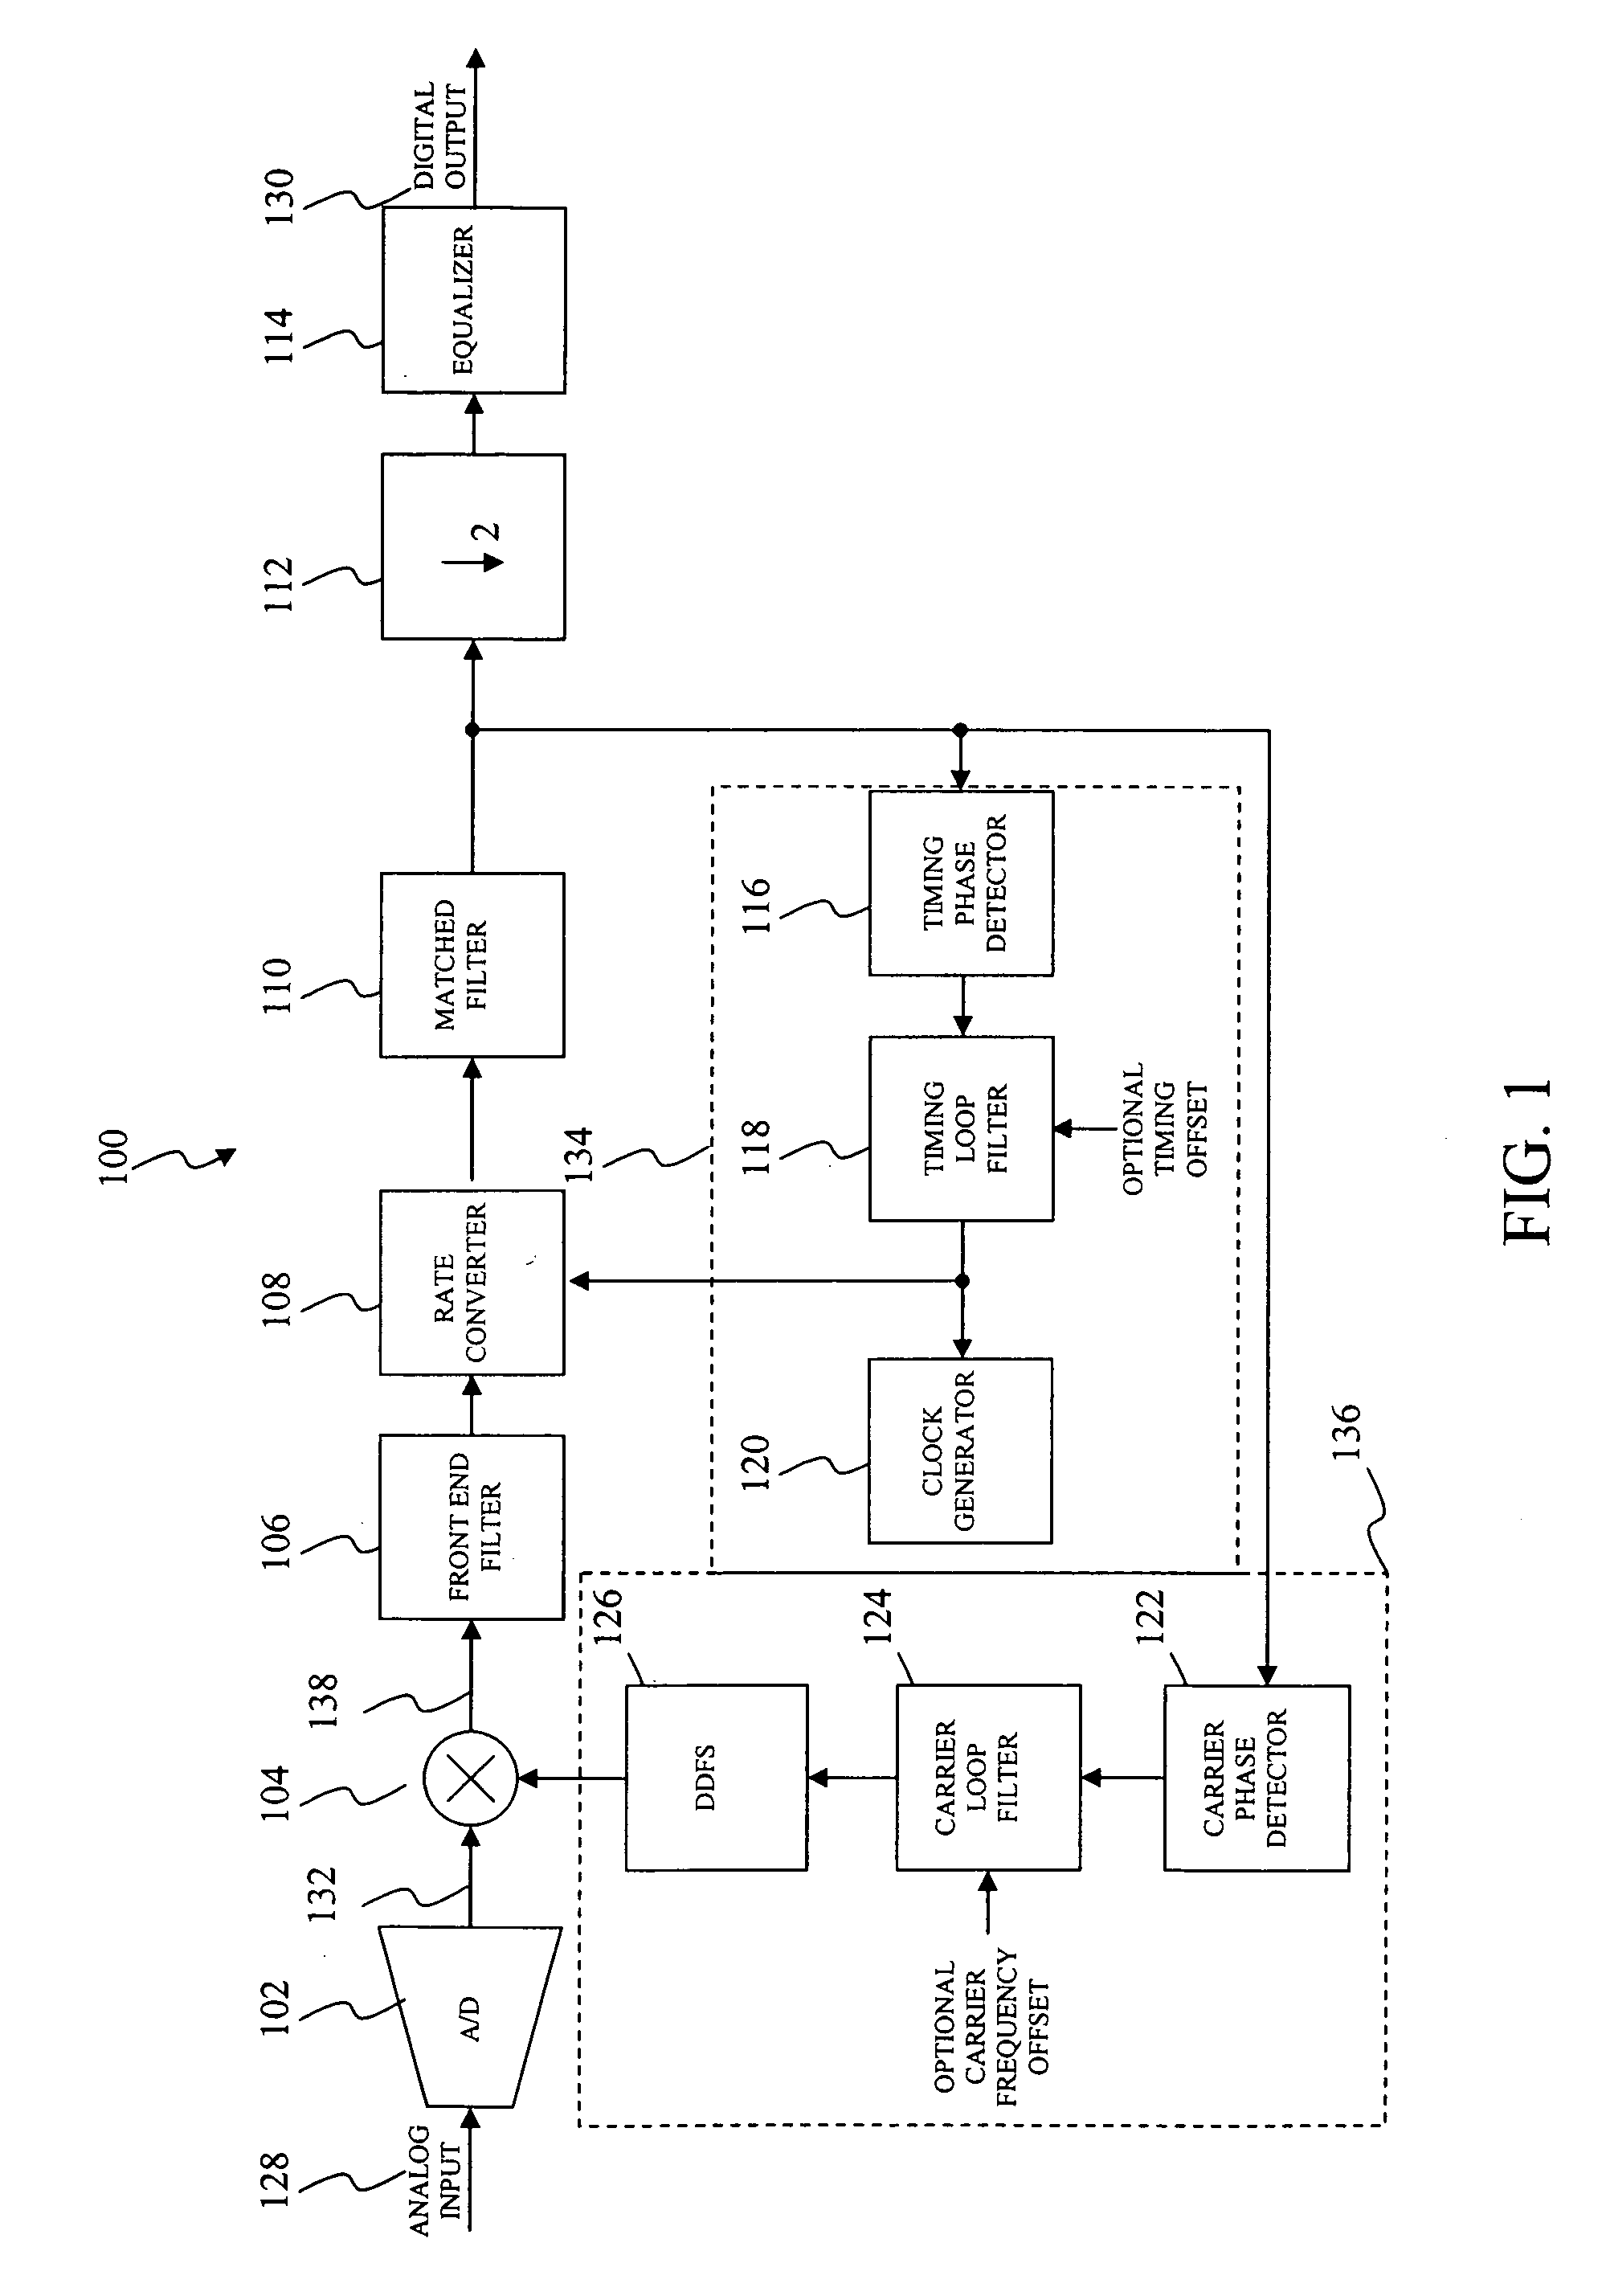 Detection of large carrier offsets using a timing loop